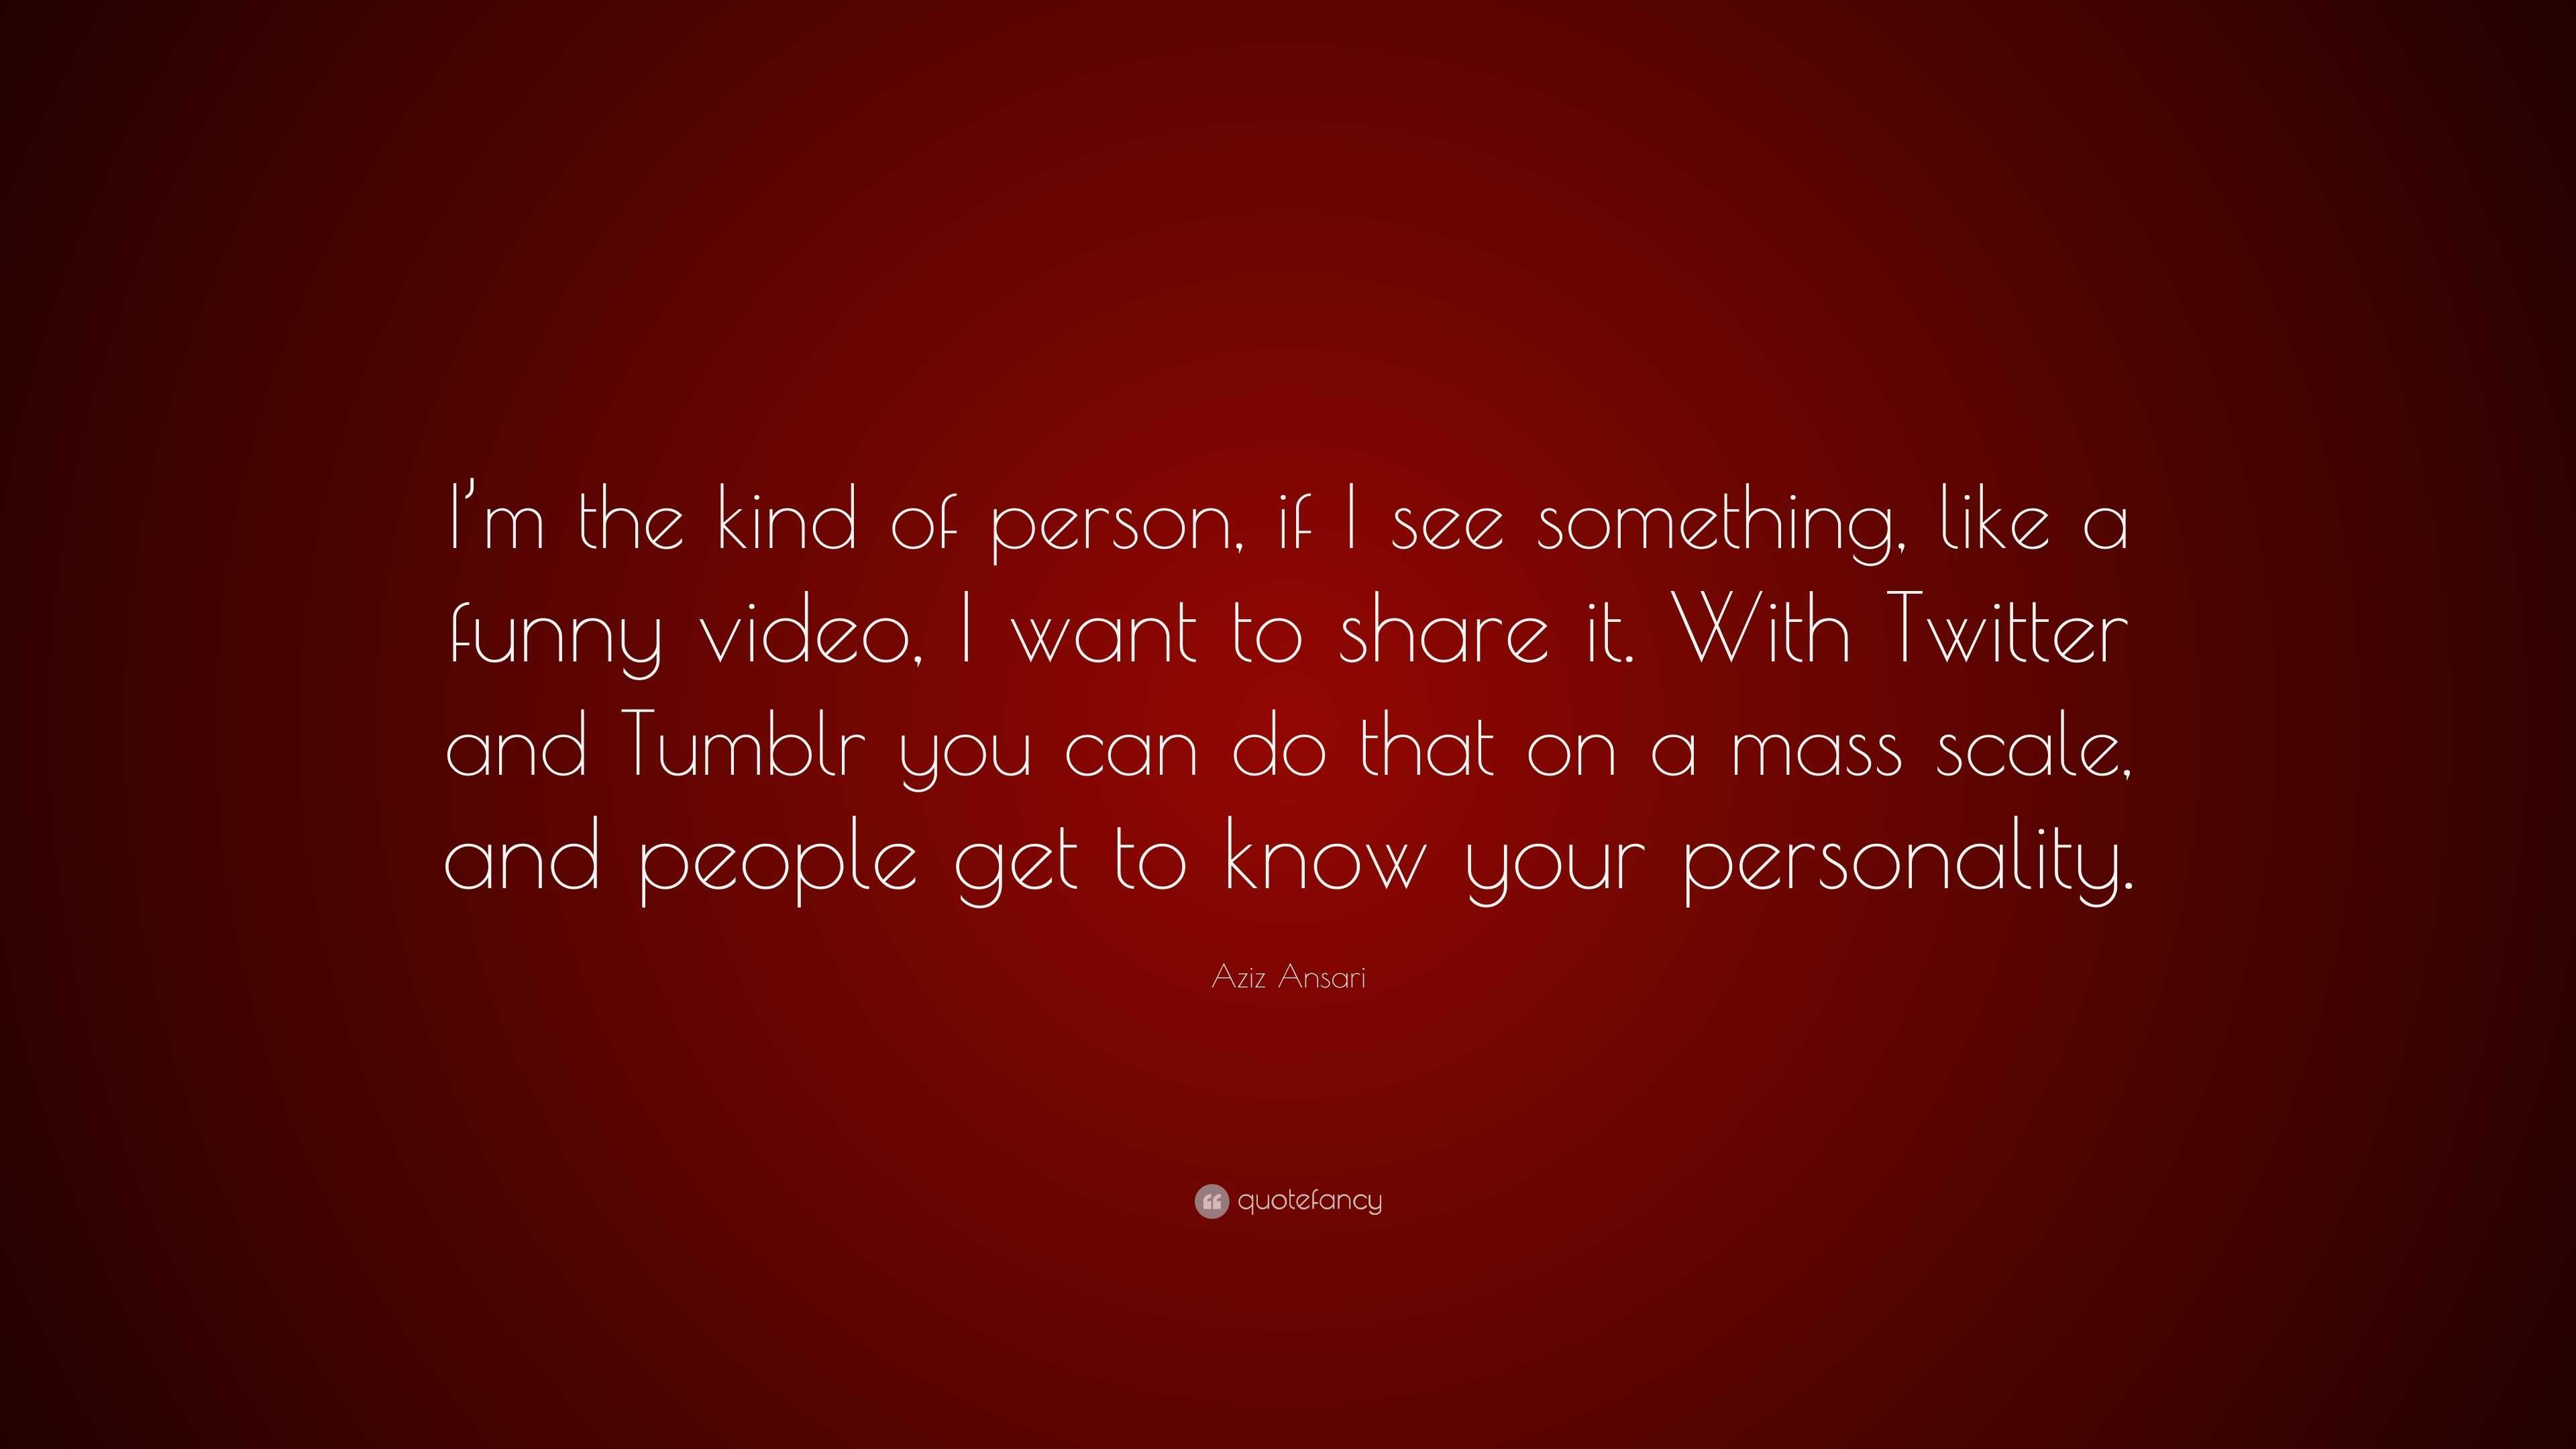 Aziz Ansari Quote: “I'm the kind of person, if I see something, like a funny  video, I want to share it. With Twitter and Tumblr you can do t...”